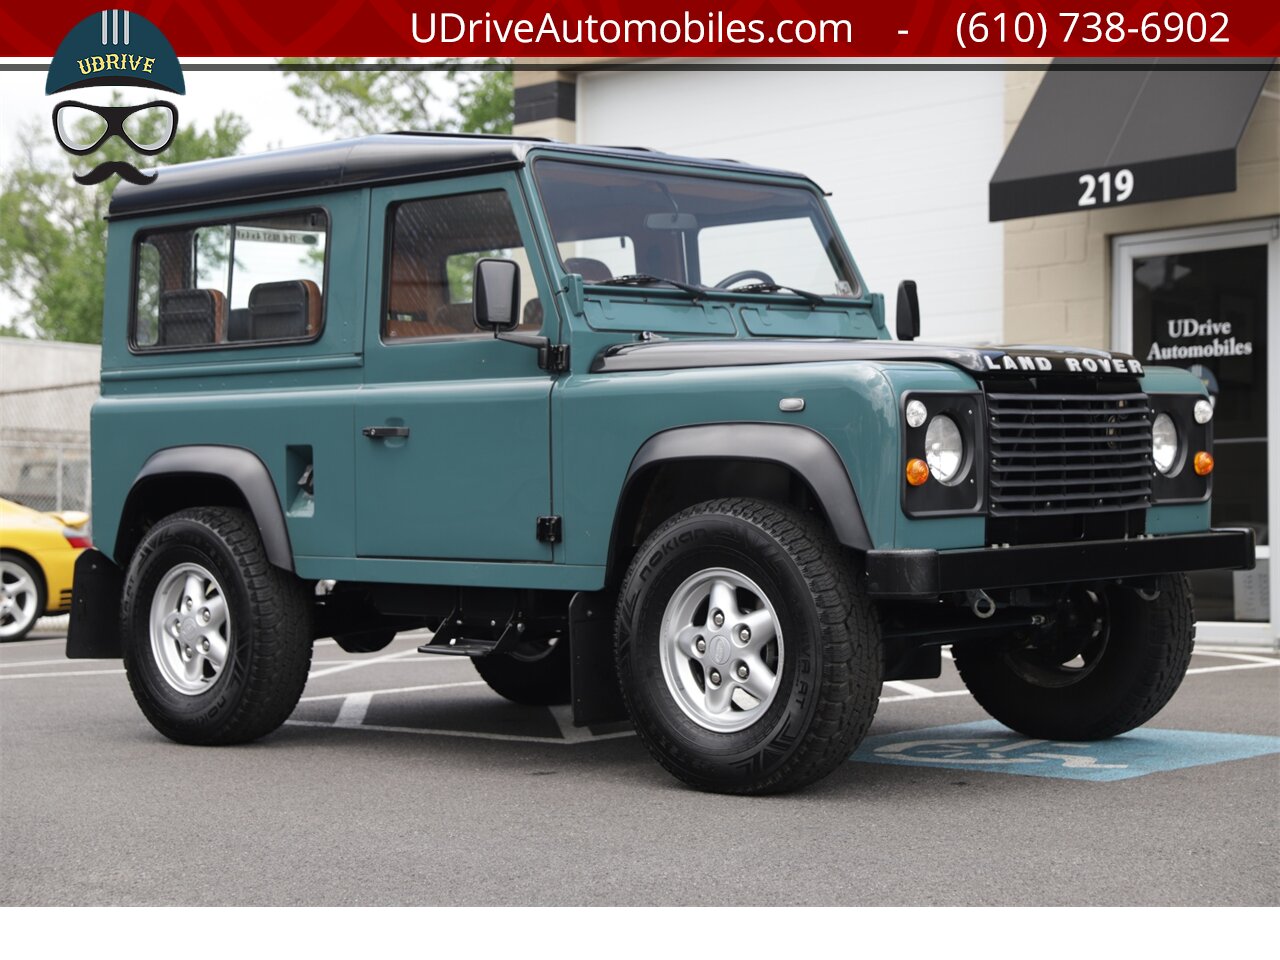 1986 Land Rover Defender 90 D90 4.0L V8 5 Speed Manual New Interior  $25k Recent Engine Build - Photo 15 - West Chester, PA 19382